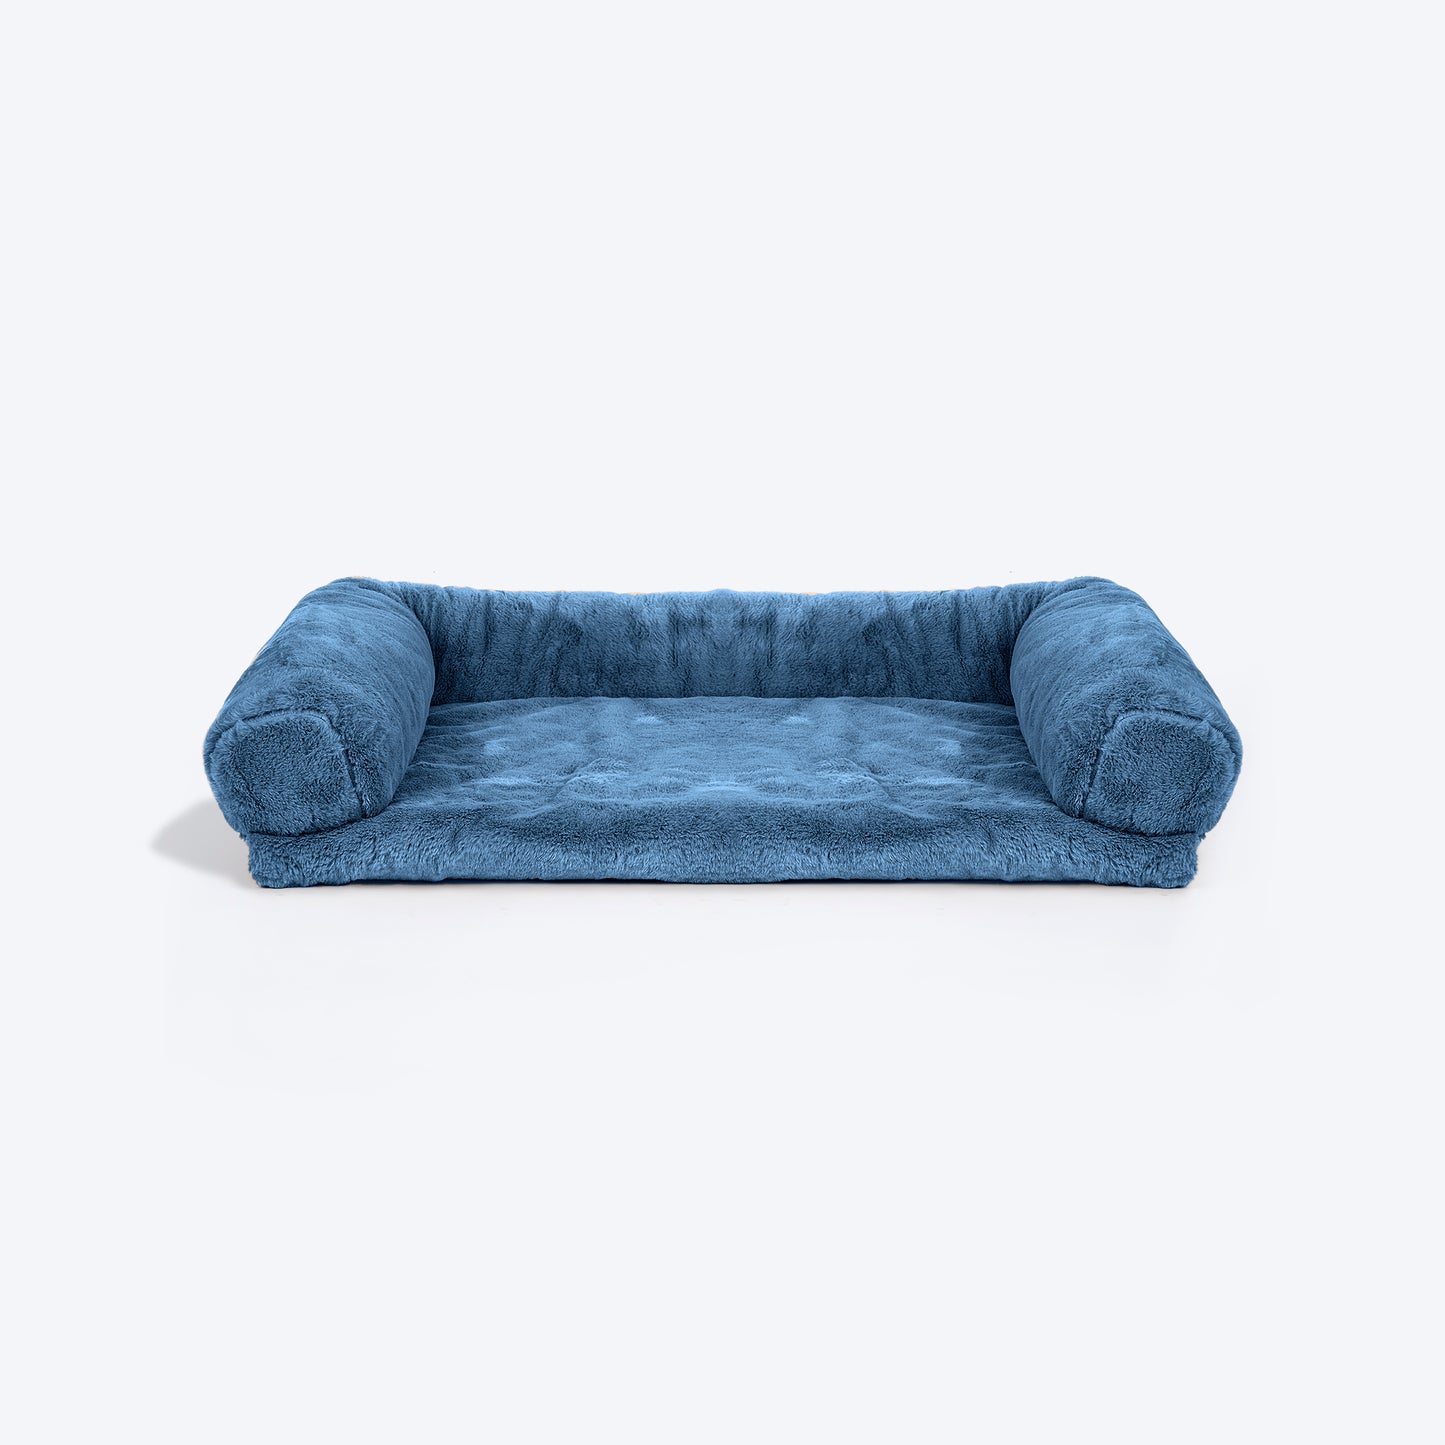 HUFT Fluffy Dreams Sofa Protector For Dogs - Navy Blue (Made To Order) - Heads Up For Tails